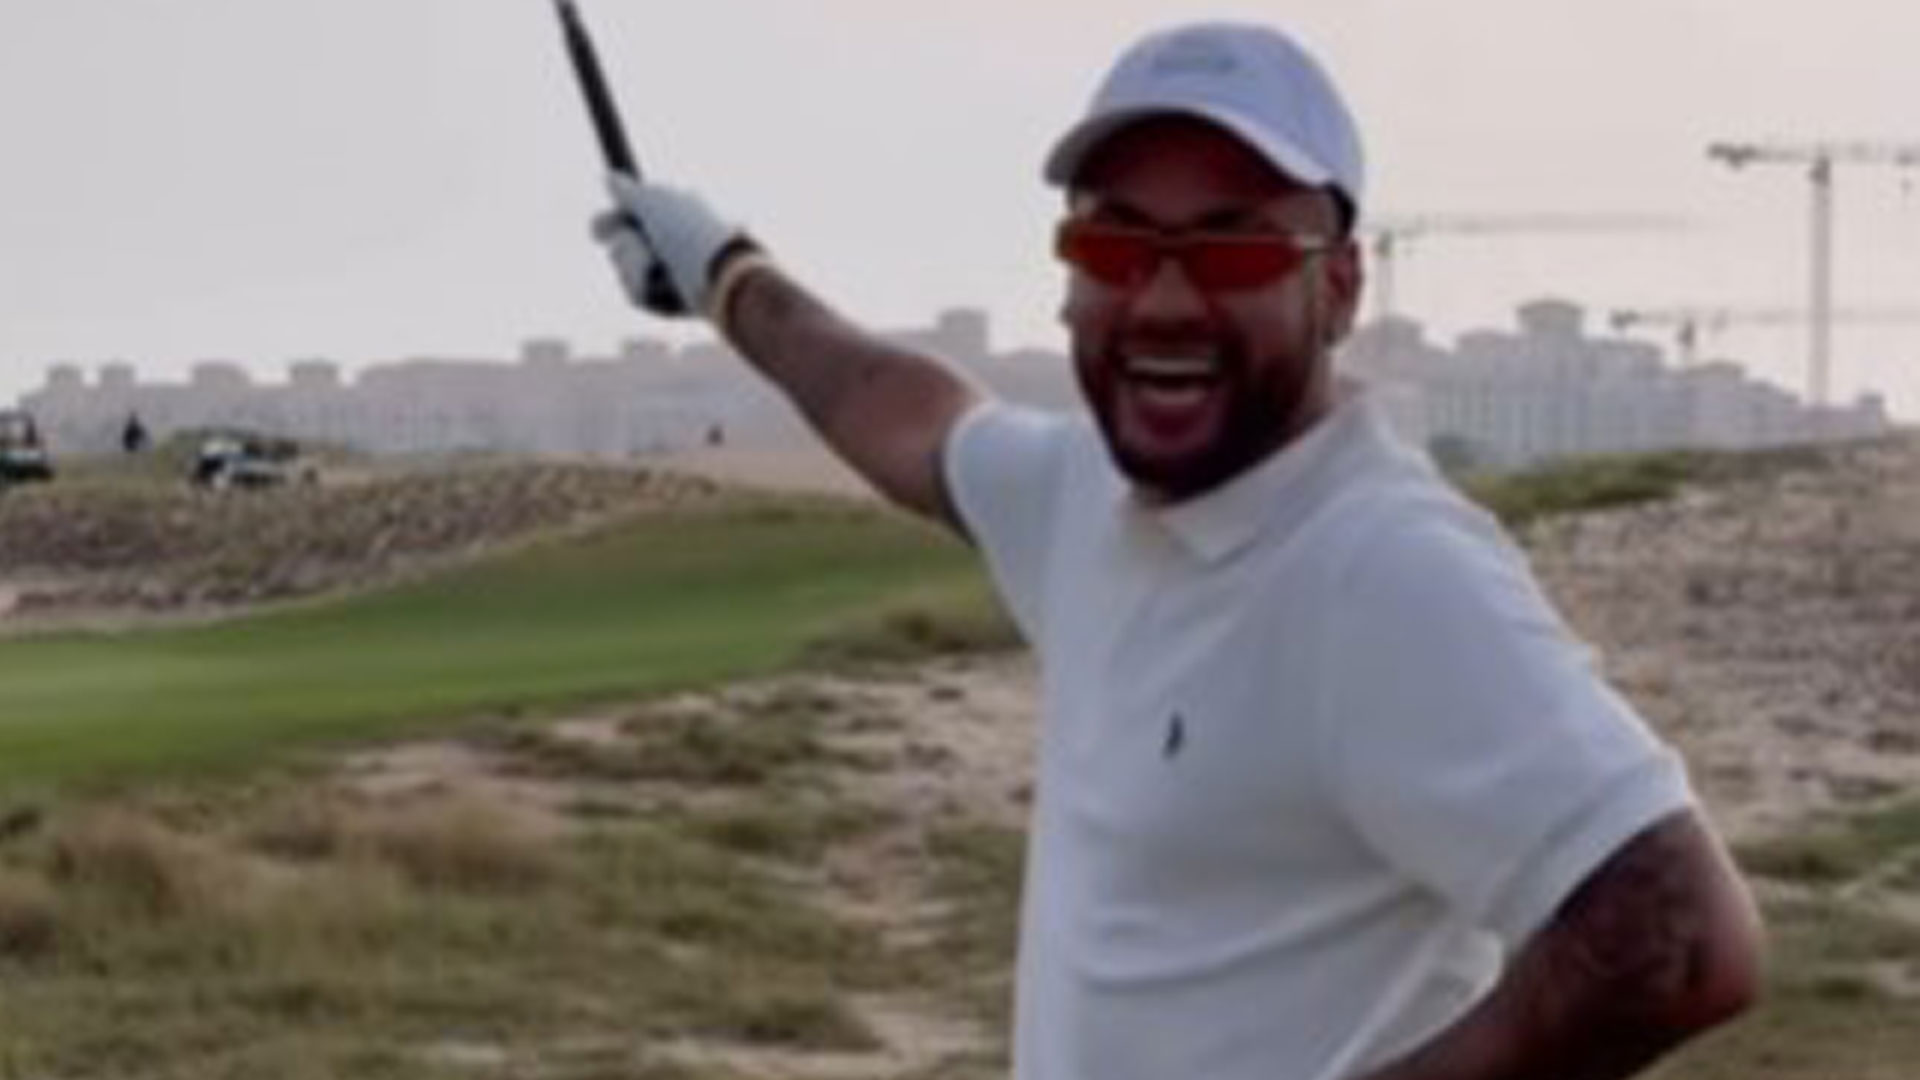 Watch Neymar leave huge dent in golf course with horrendous swing as fans urge Gareth Bale to give him tips [Video]